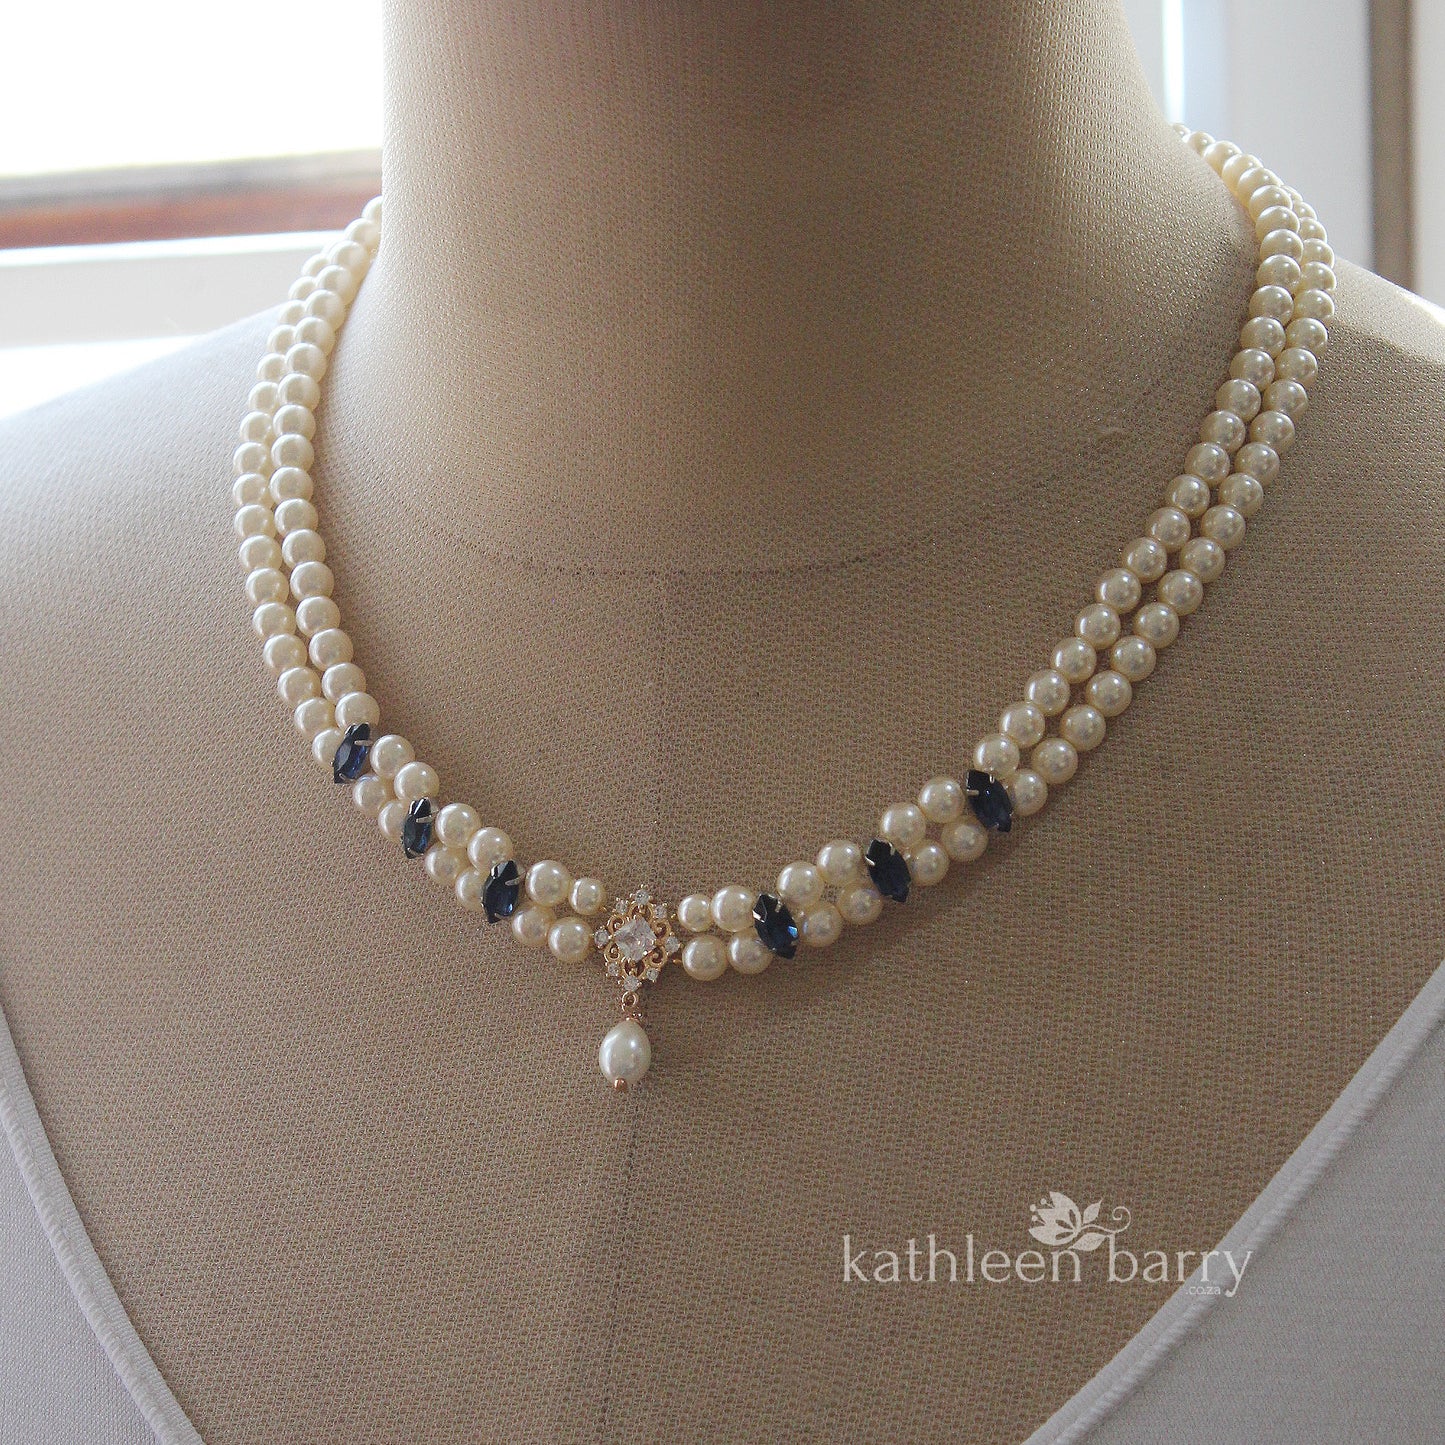 Maryvonne rhinestone pearl necklace gold cubic zirconia detailing - Rhinestone + pearl color options available